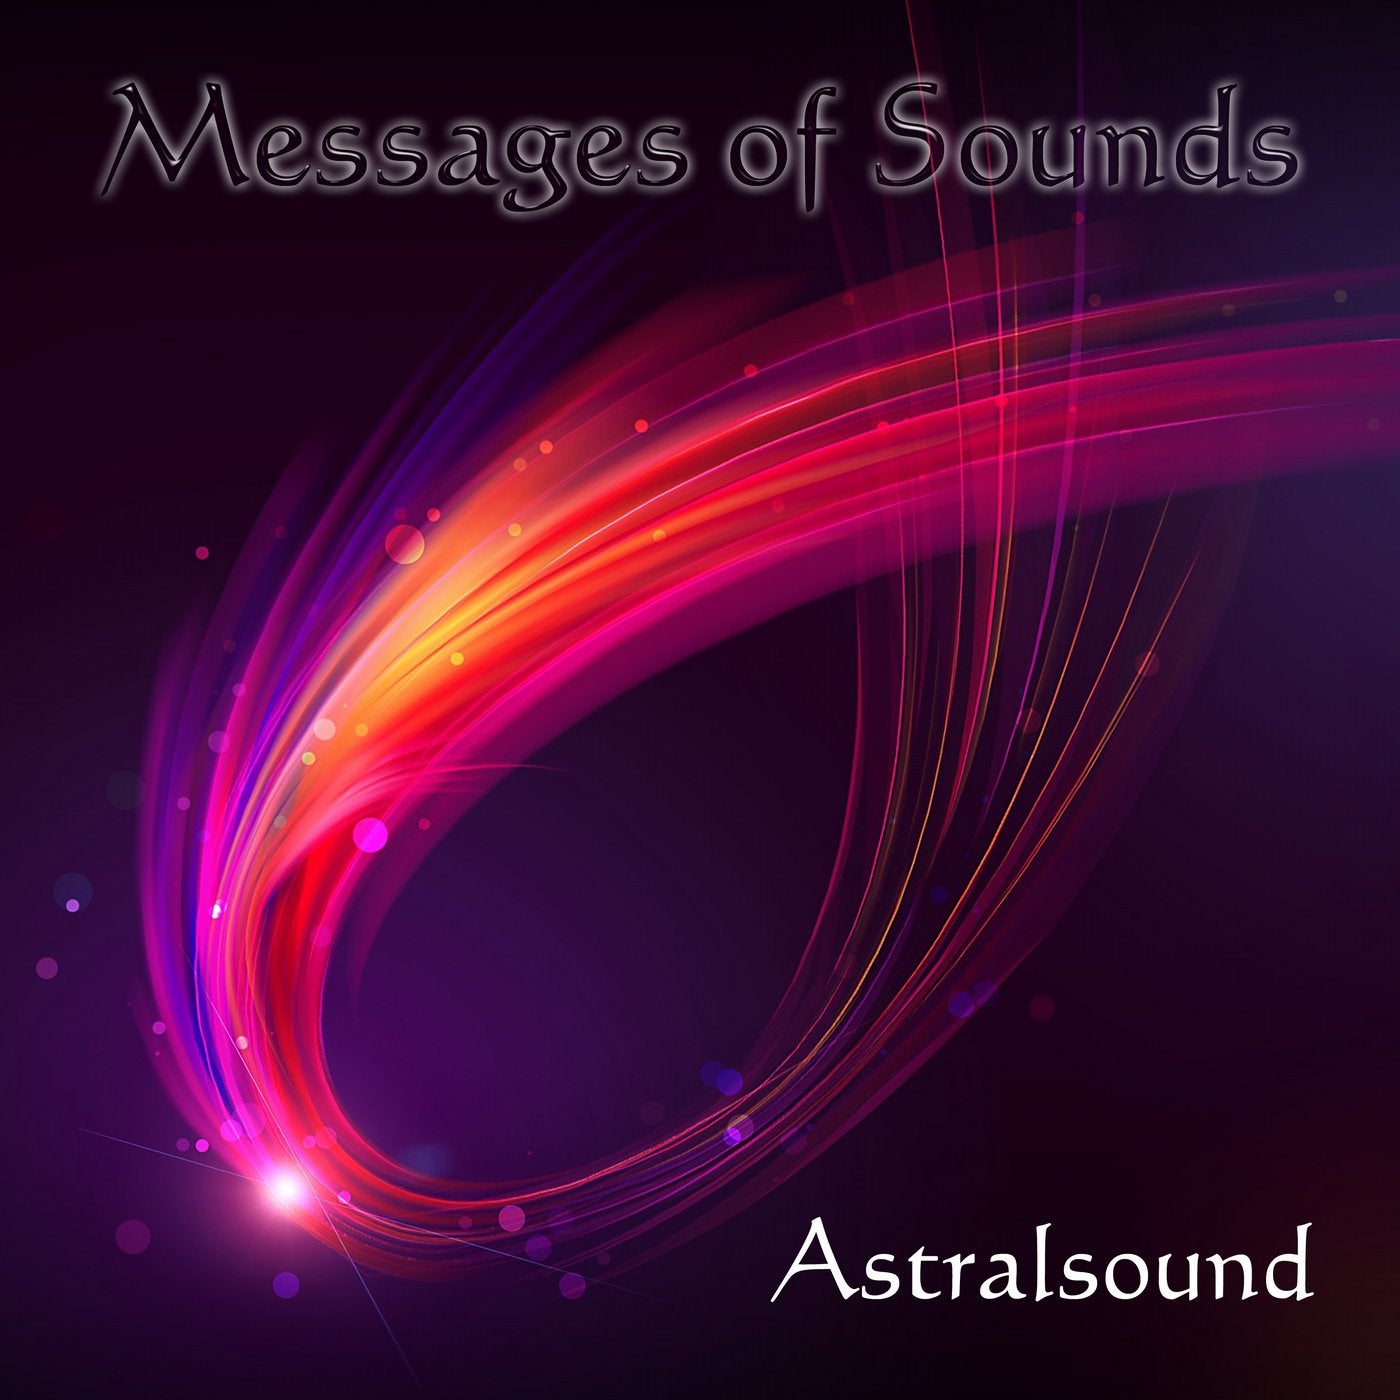 Messages of Sounds